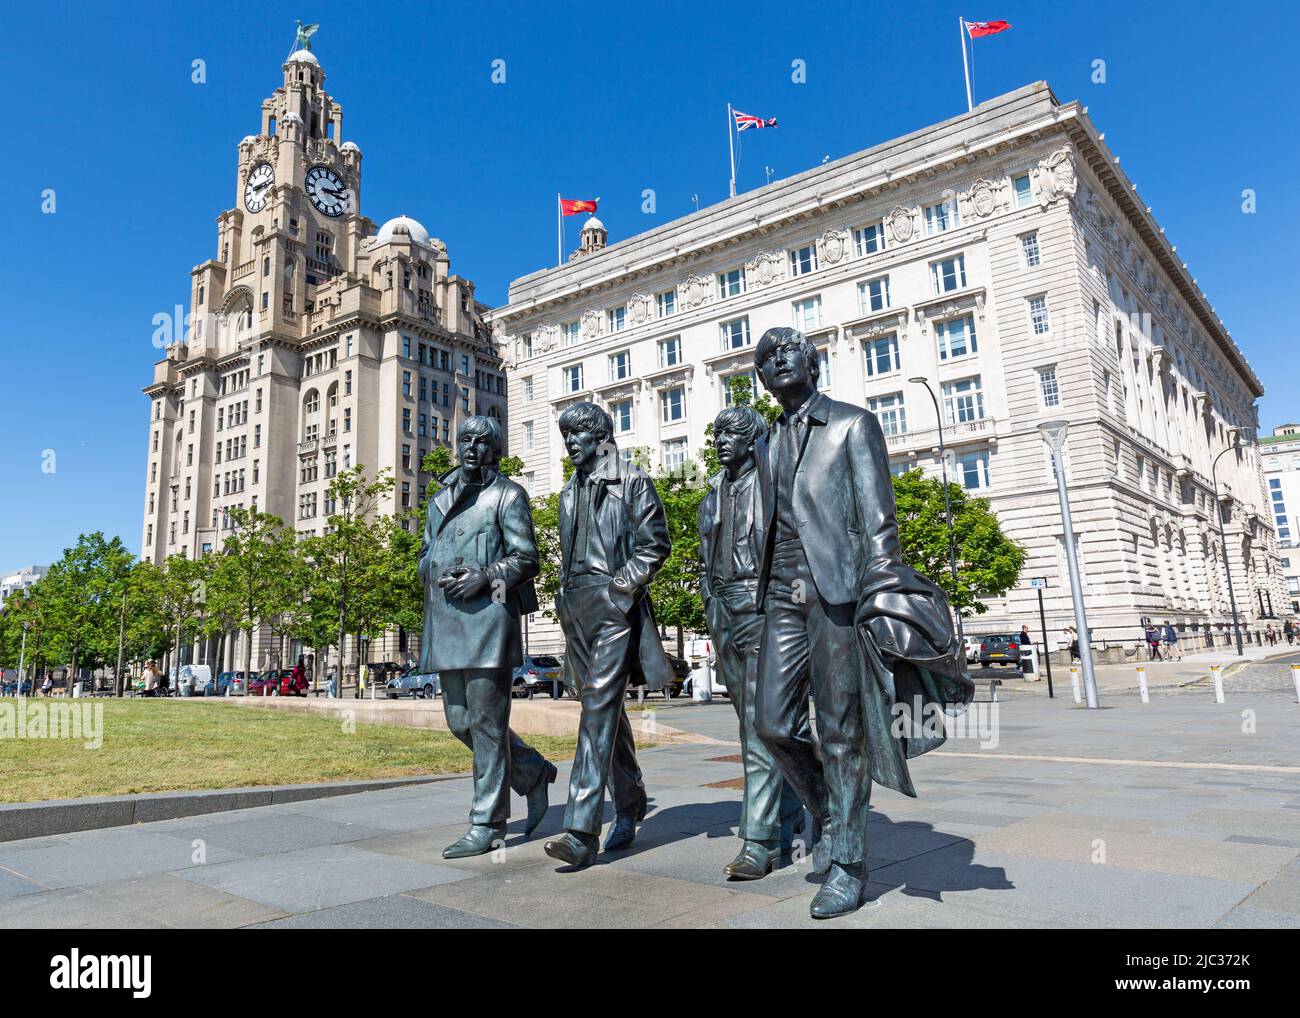 The Beatles statue, Royal Liver Building and Cunard Building, Pier Head, Liverpool, England, UK Stock Photo